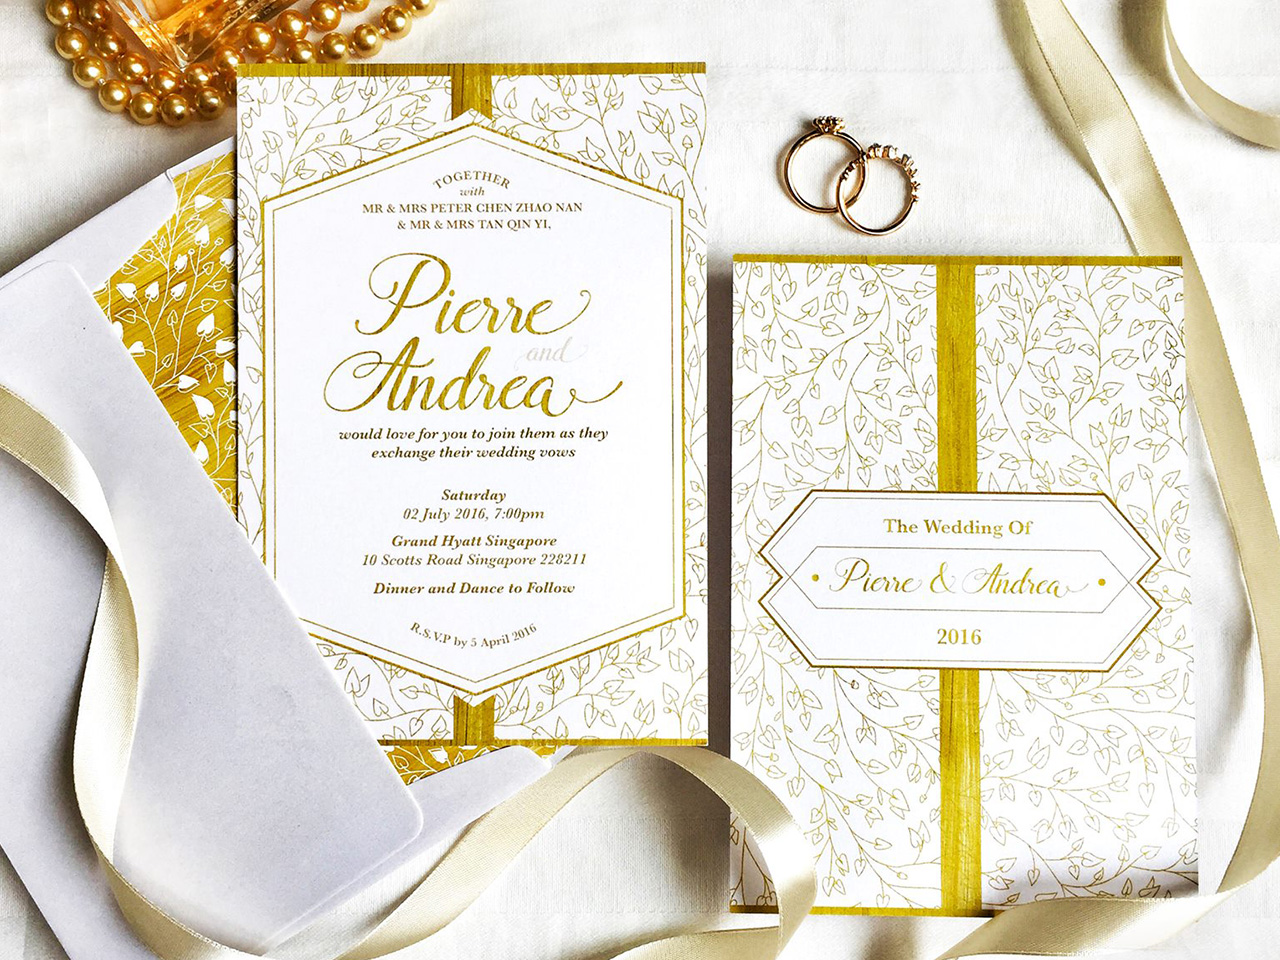 Wedding Invitation Cards in Singapore 5 Online Stores to